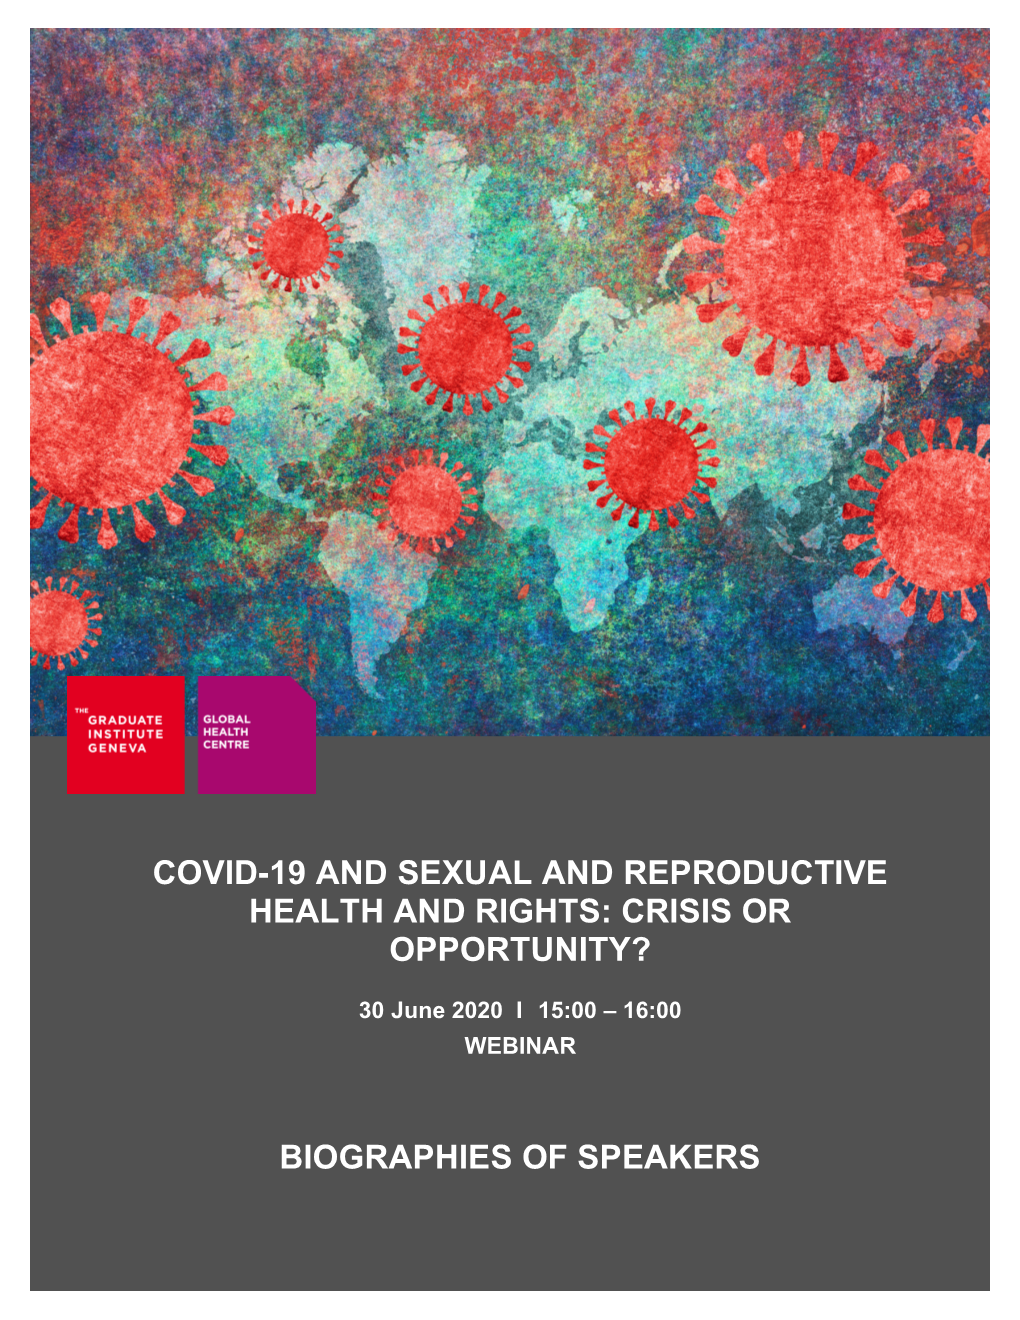 Covid-19 and Sexual and Reproductive Health and Rights: Crisis Or Opportunity? Biographies of Speakers